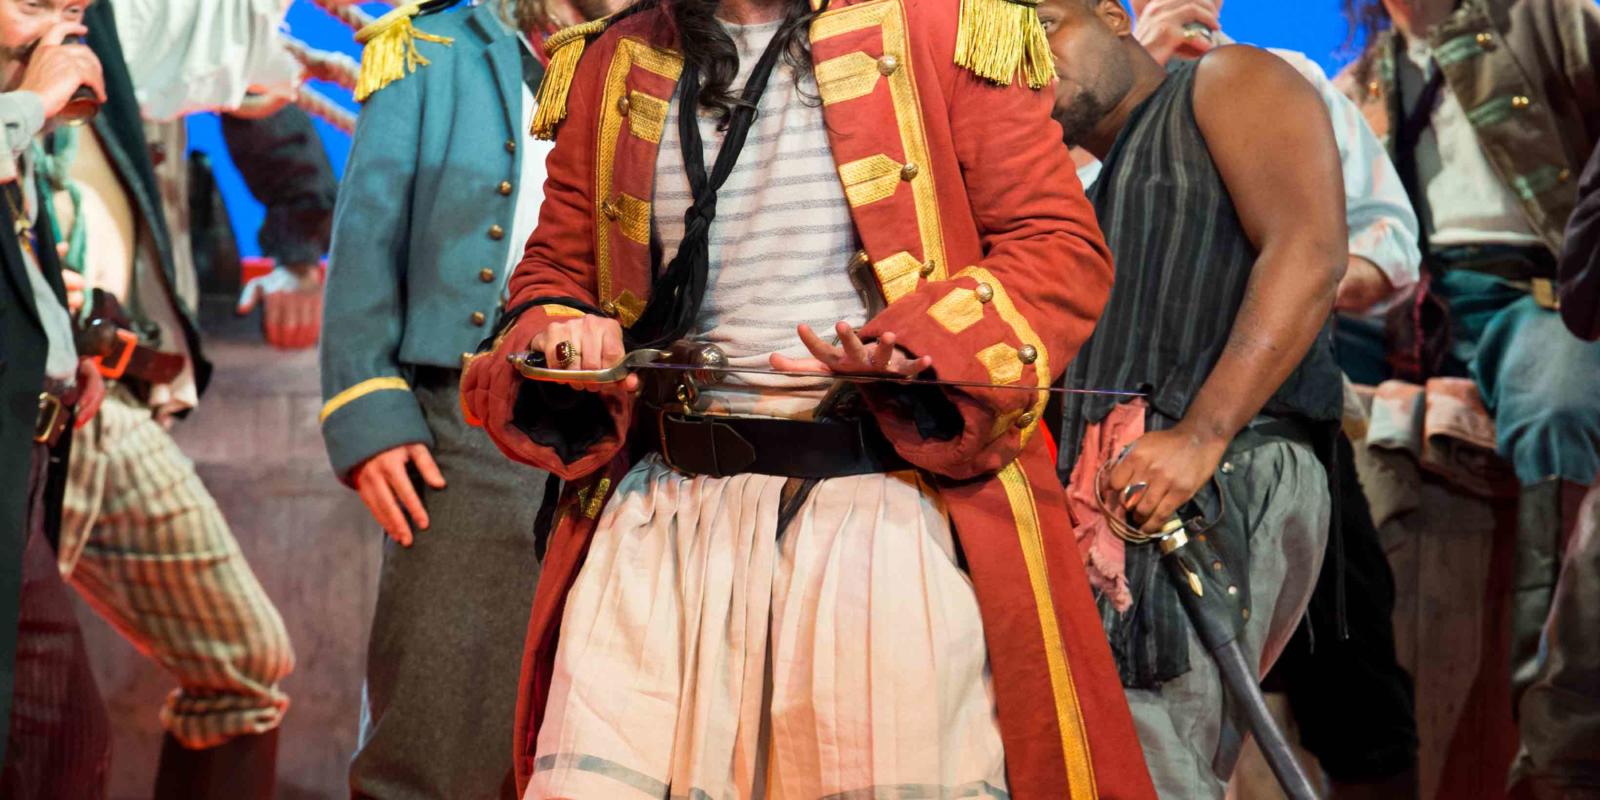 ENO's The Pirates of Penzance - Ashley Riches as The Pirate King. Photo by Tom Bowles